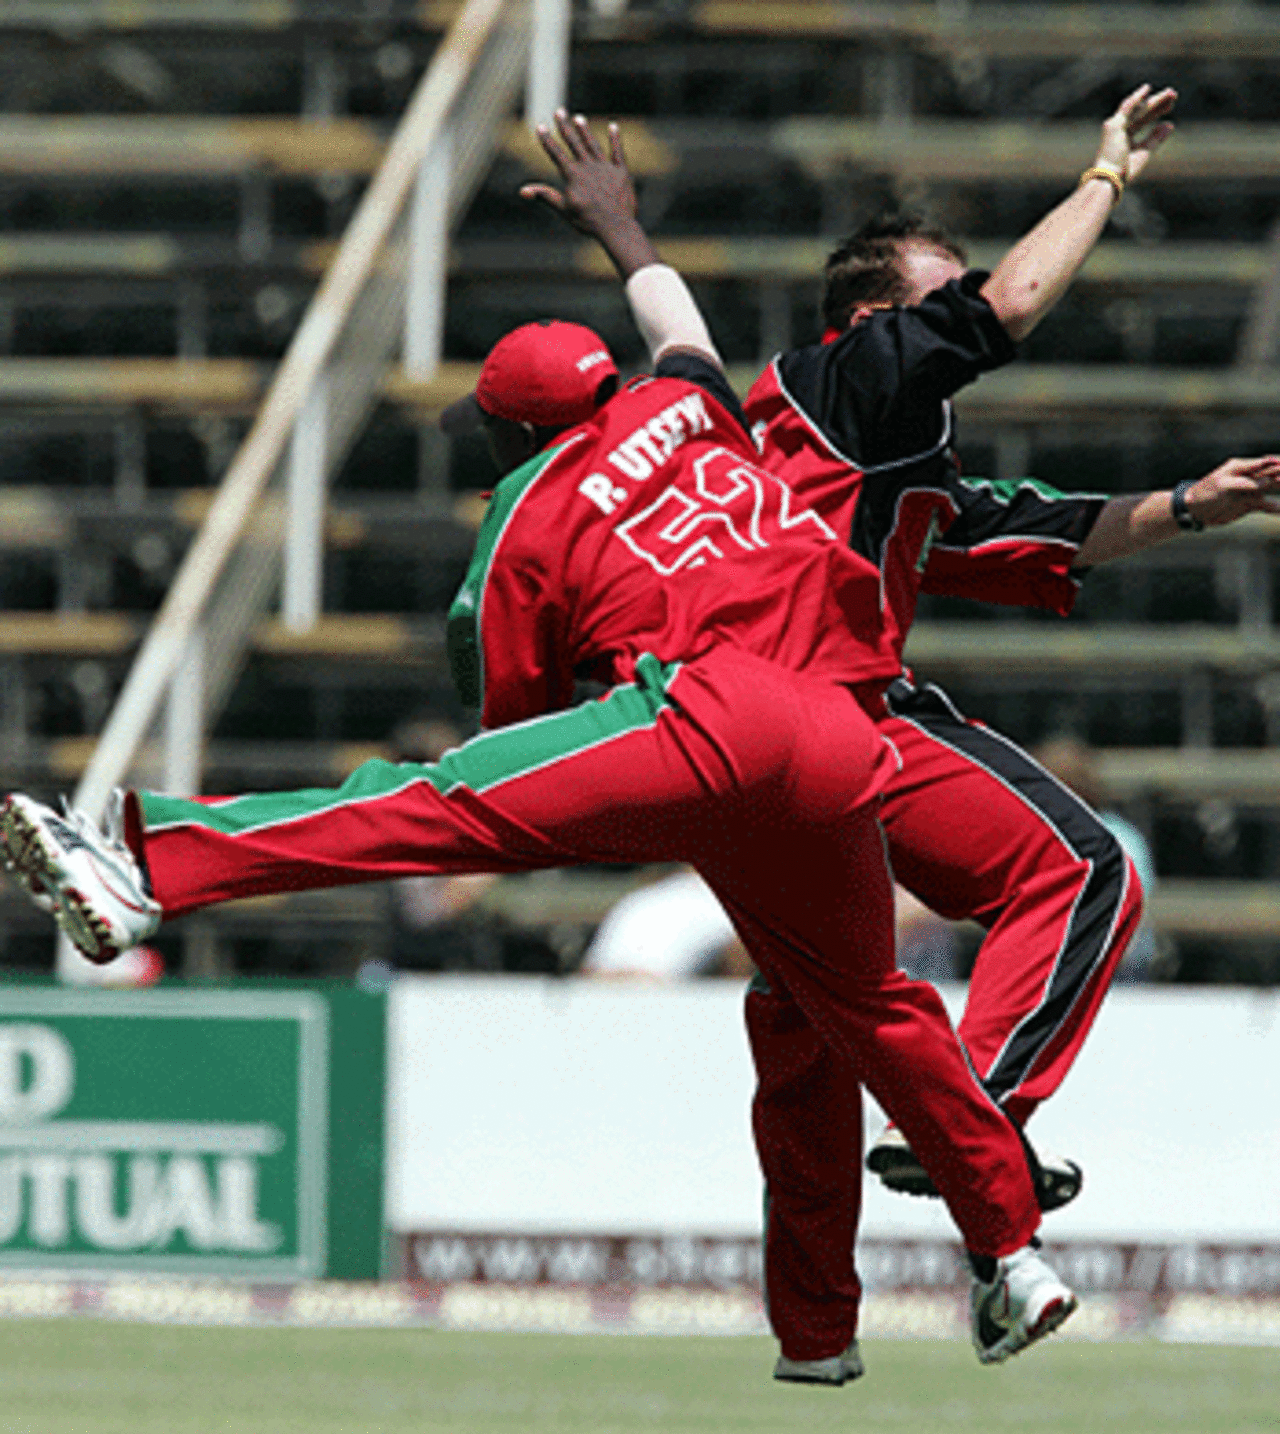 Prosper Utseya and Gaving Ewing are overjoyed at Nathan Astle's wicket, Zimbabwe v New Zealand, Harare, August 31, 2005